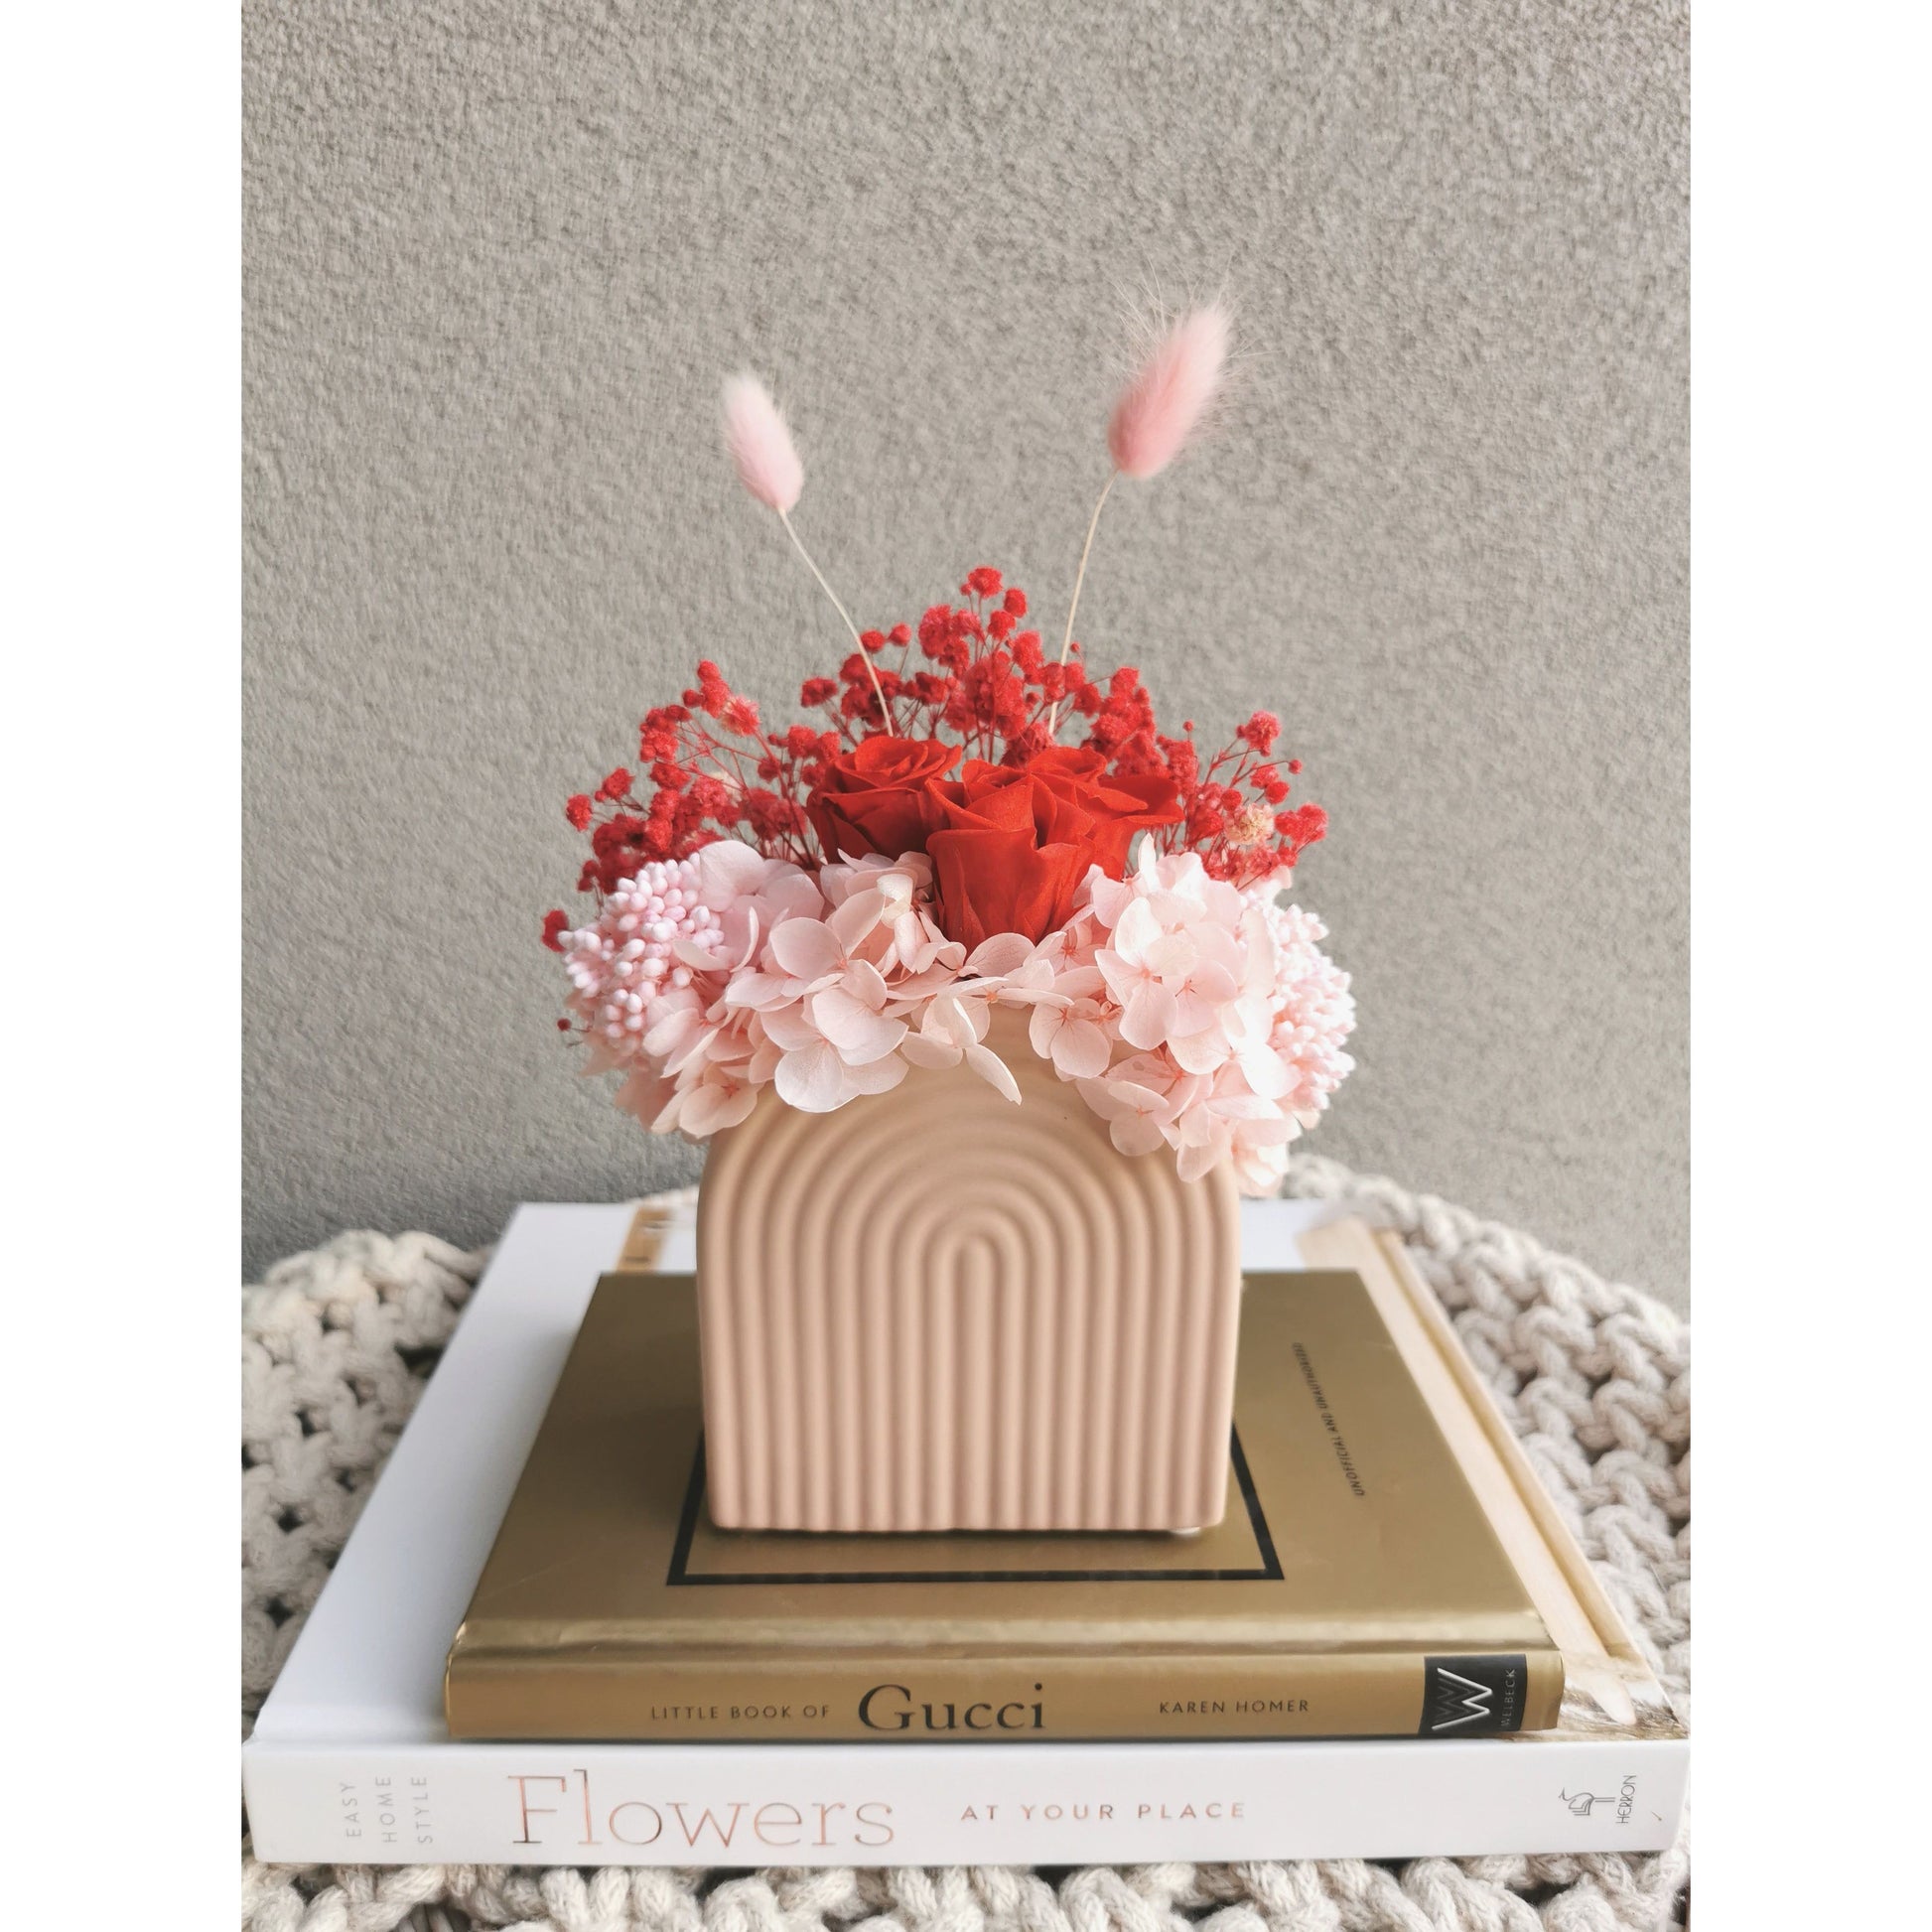 Valentines Day dried & preserved flower arrangement with red & pink flowers in pink arch vase. Photo shows arrangement sitting front on, on books against a blank wall